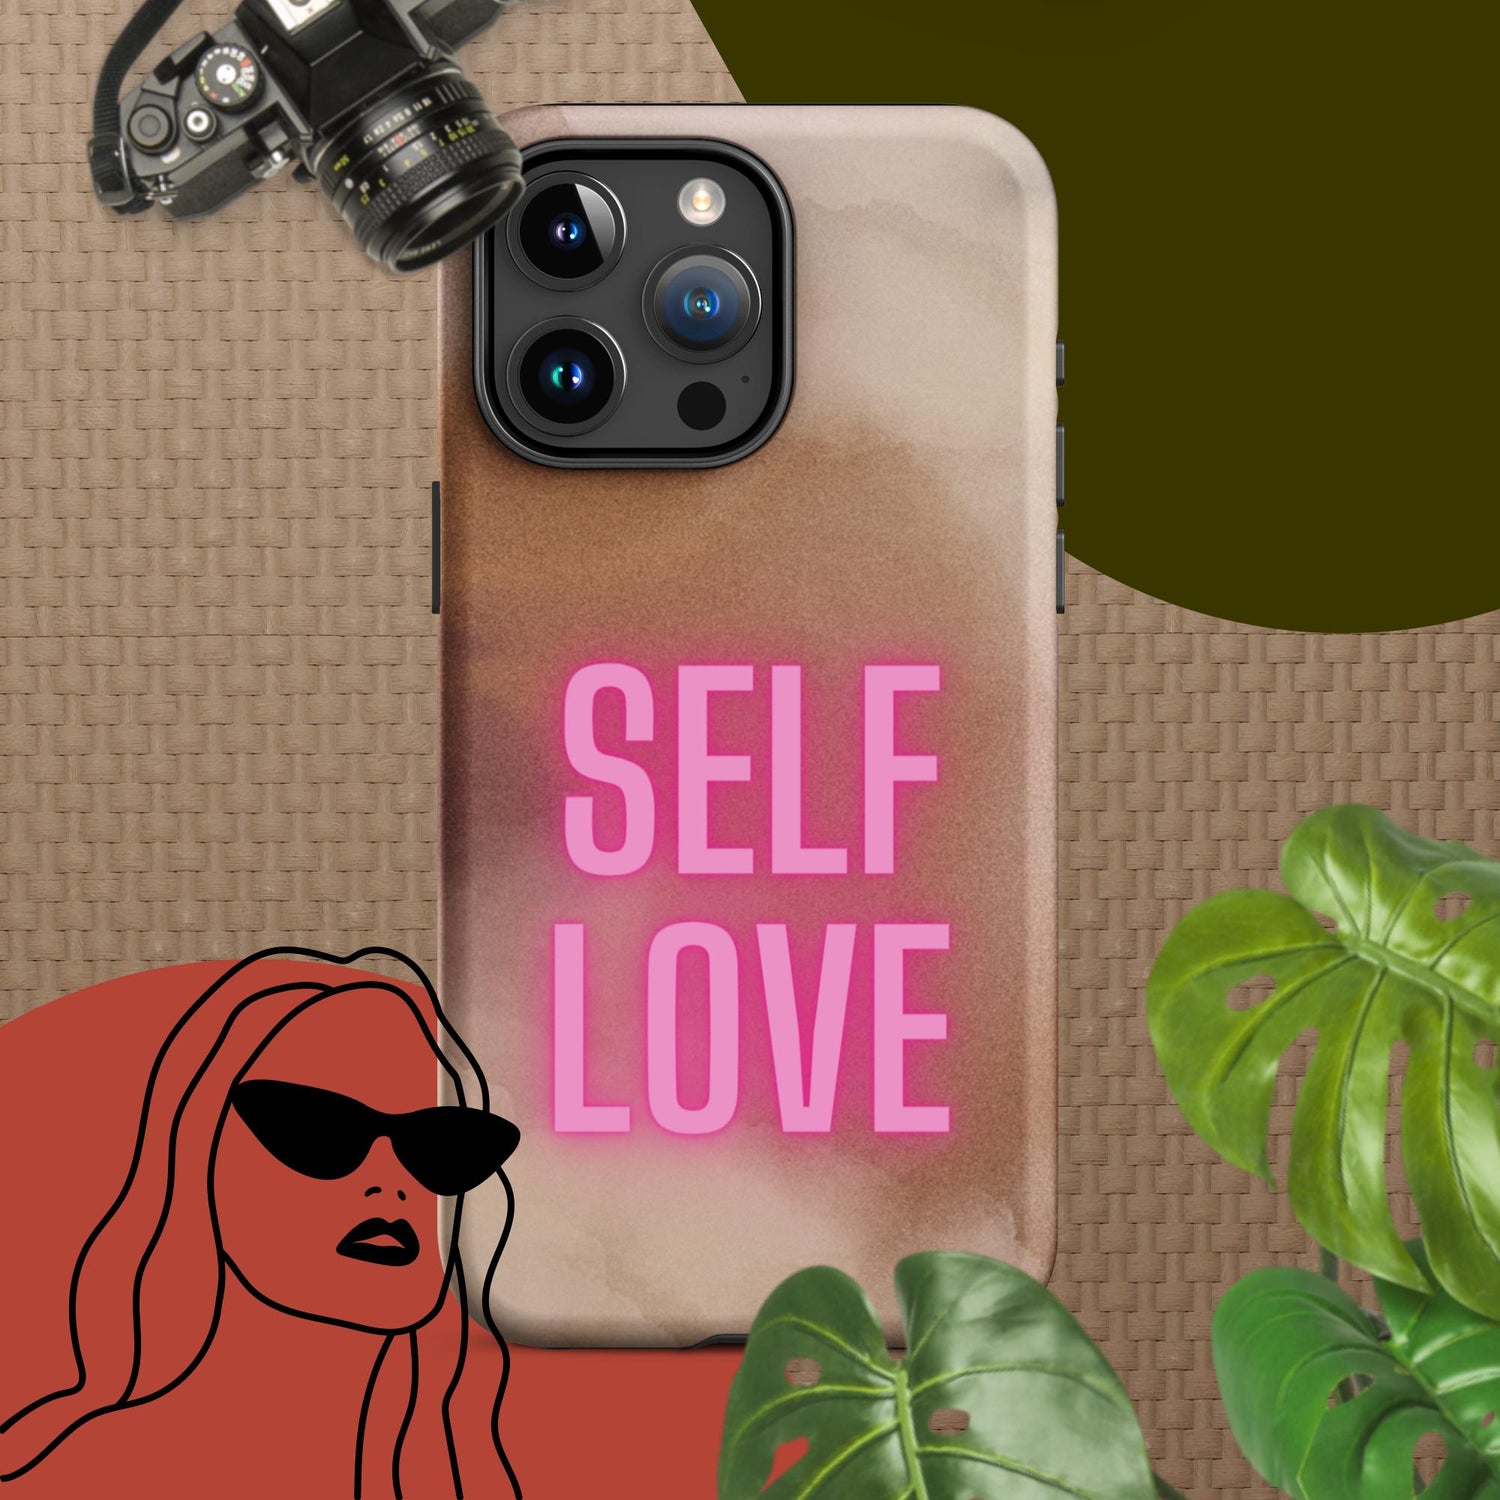 Shockproof Protective Iphone Case - Self Love, image, Iphone Case